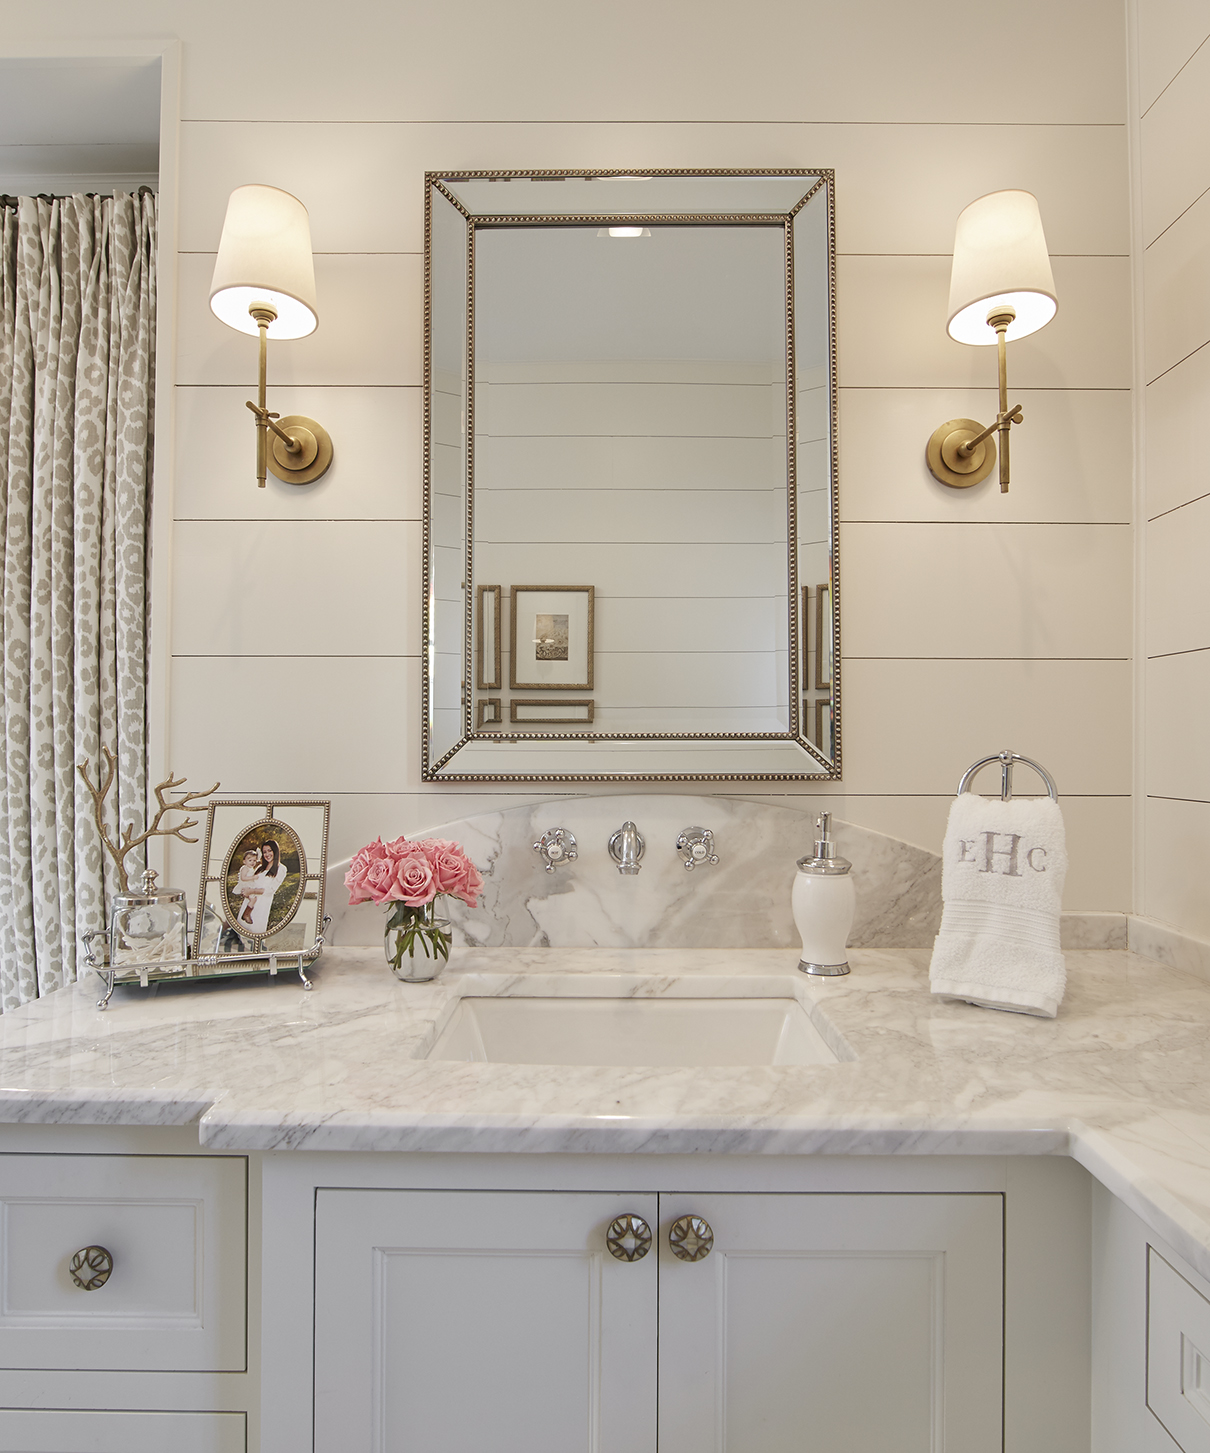 The master bathroom has a glamorous feel with its marble countertops, gold accents and original porcelain hexagon floor tiles. The white shiplap walls tie the room in with the styling of the rest of the house.